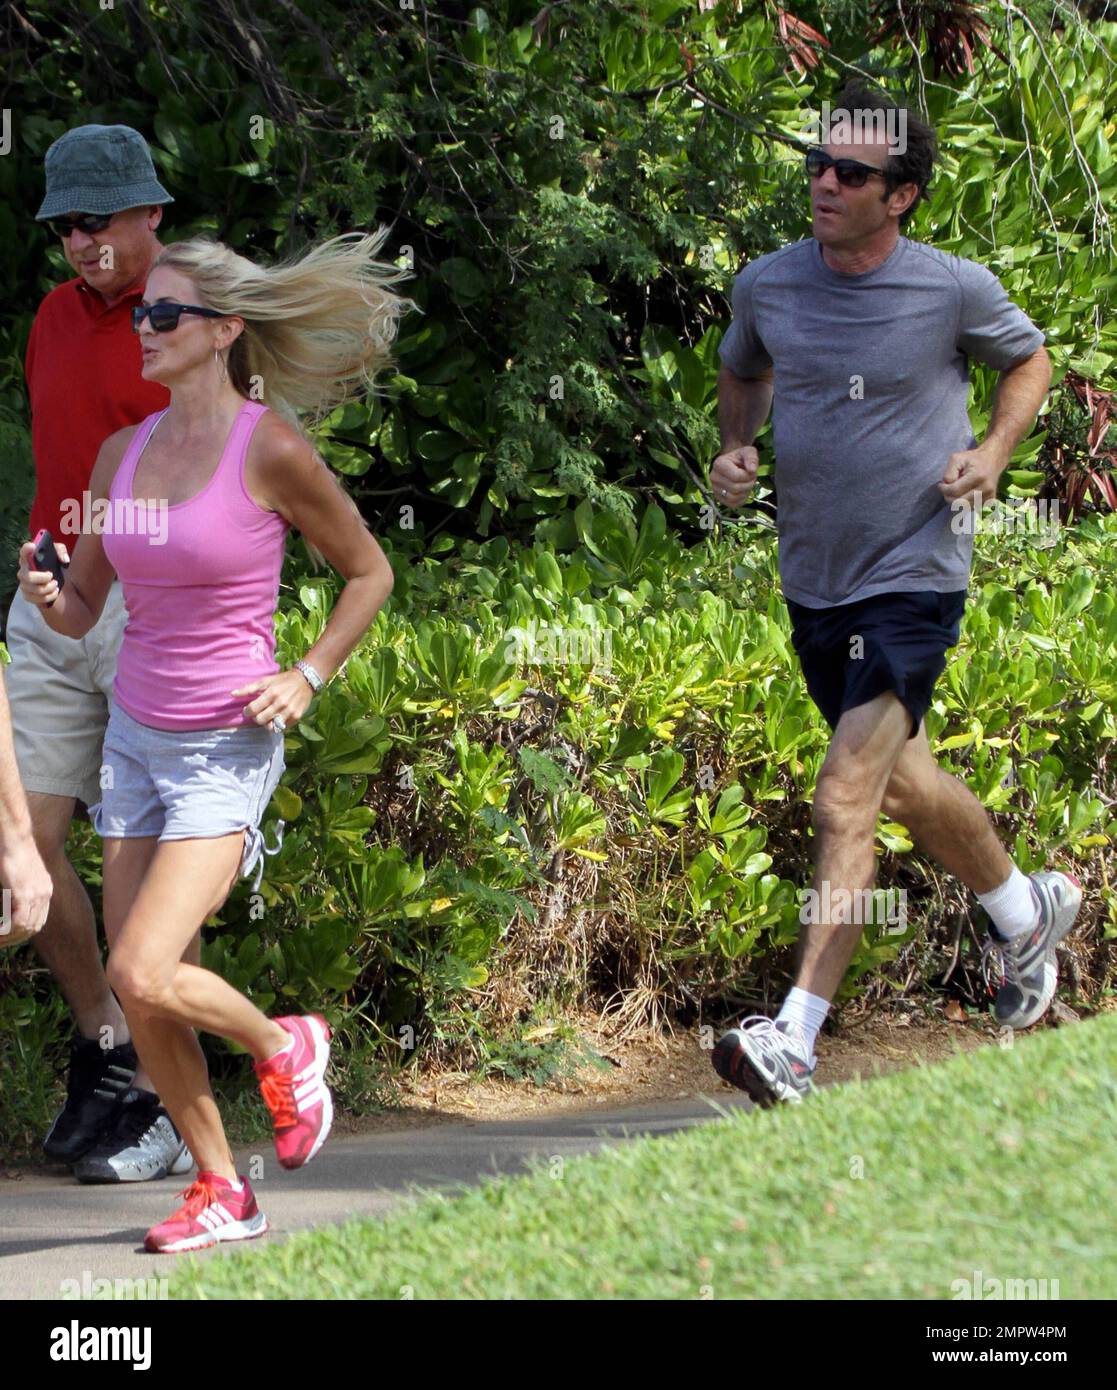 Hunky actor Dennis Quaid and wife Kimberly Buffington keep up their fit physiques with a jog during a Hawaiian holiday. Quaid, who reportedly put his Montana ranch up for sale earlier this week, recently said he dreams of moving to Hawaii to spend more time surfing. The 57-year-old 'Footloose' star first came to love surfing when filming the movie 'Soul Surfer,' which tells the story of shark attack victim Bethany Hamilton. Maui, HI. 26th October 2011.   . Stock Photo